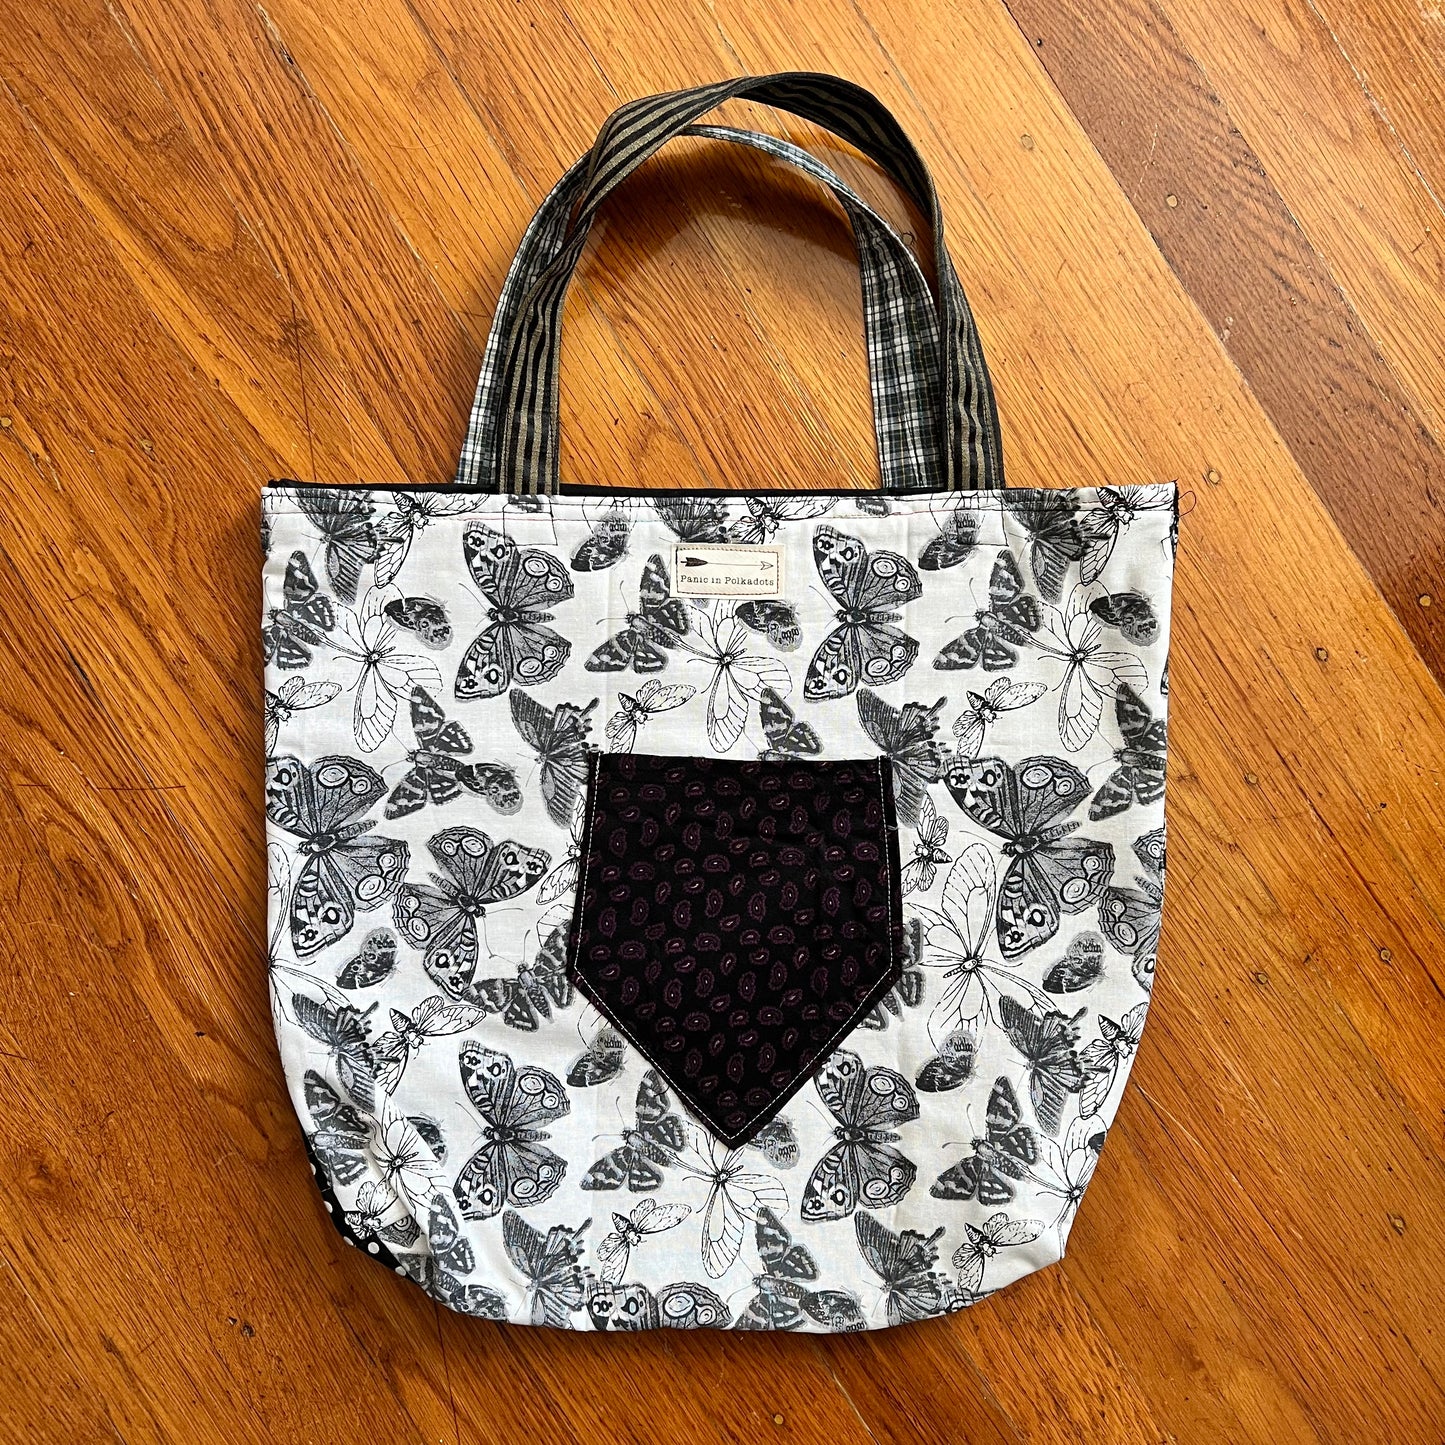 back view of tote bag, with a necktie pocket and a Panic in Polkadots label